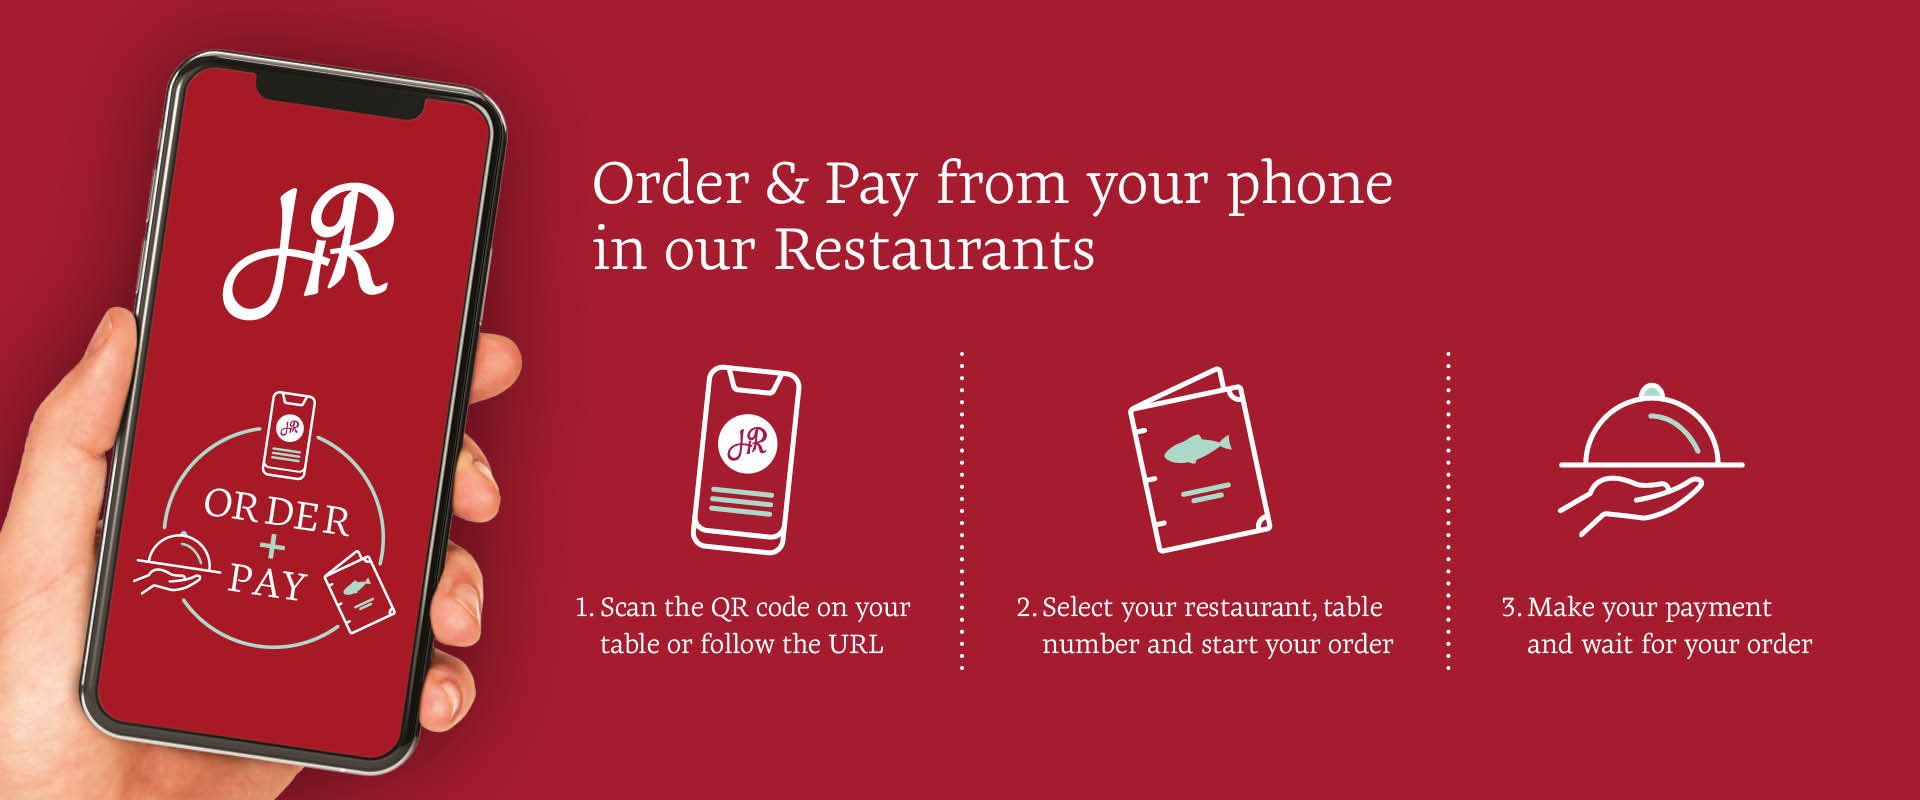 Order & Pay from your phone in our restaurants